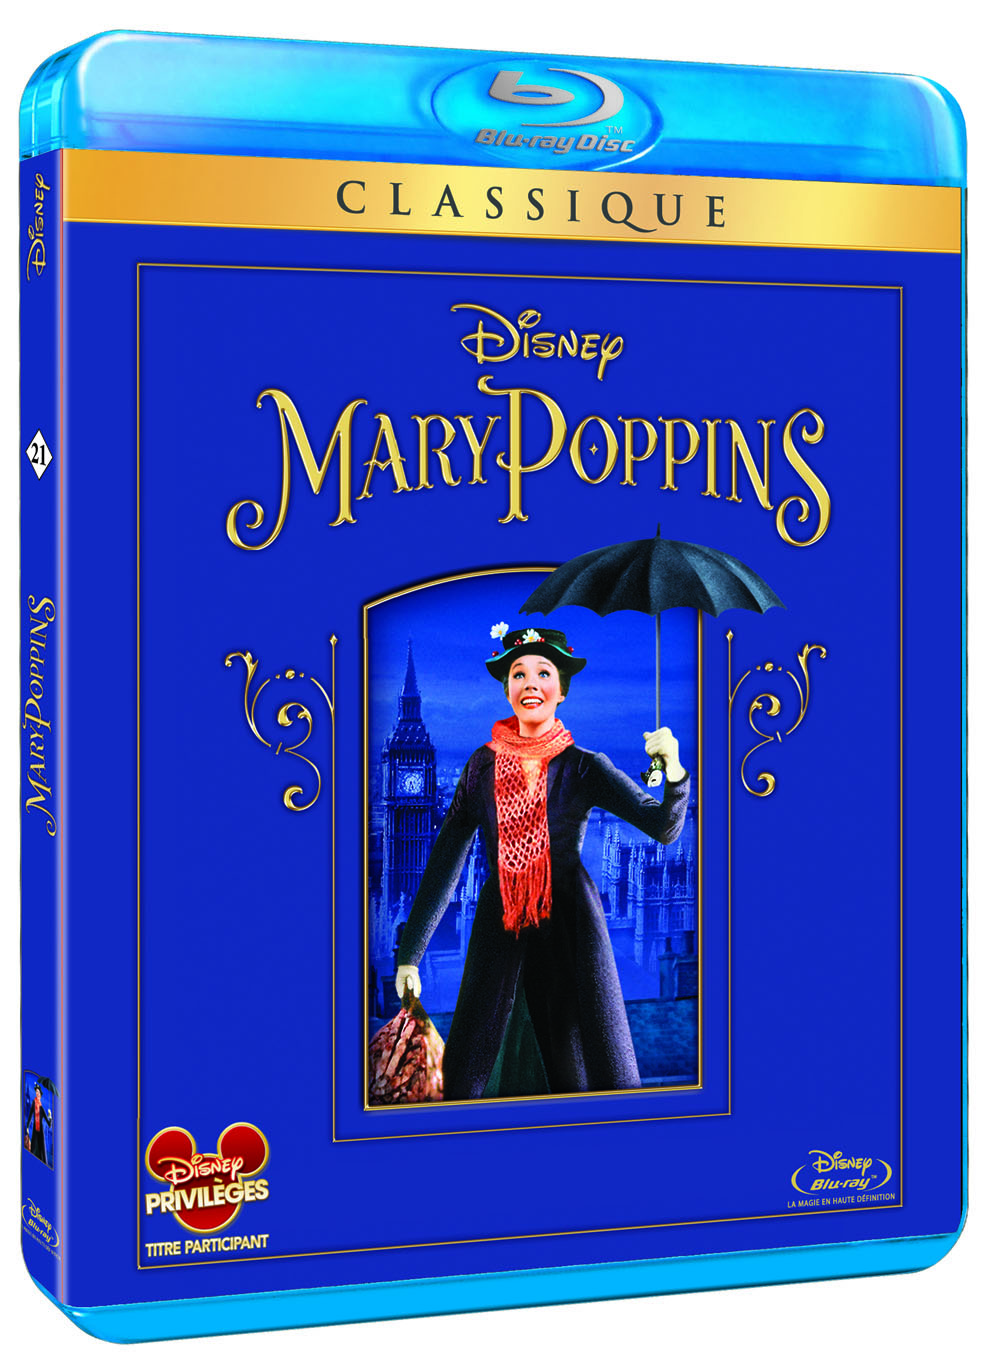 julie andrews - Mary Poppins : notre avis sur le Blu-Ray blu ray mary poppins edition 50e anniversaire 124335